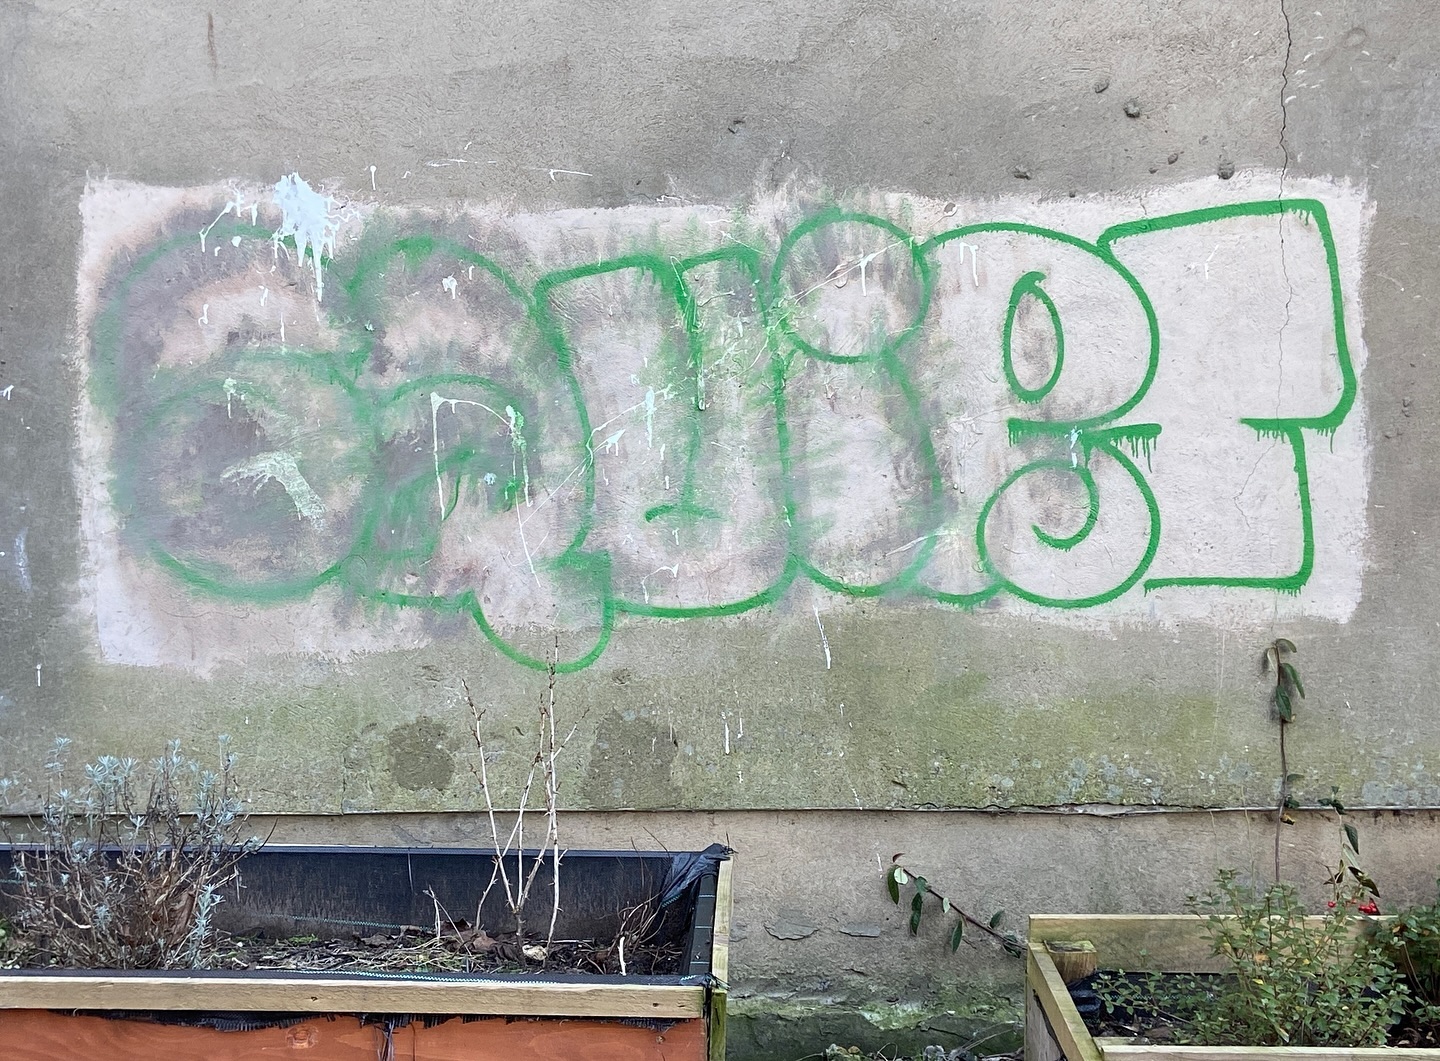 a resilient squirt, graffiti once powerwashed on mossy wall. clean frame for renewal